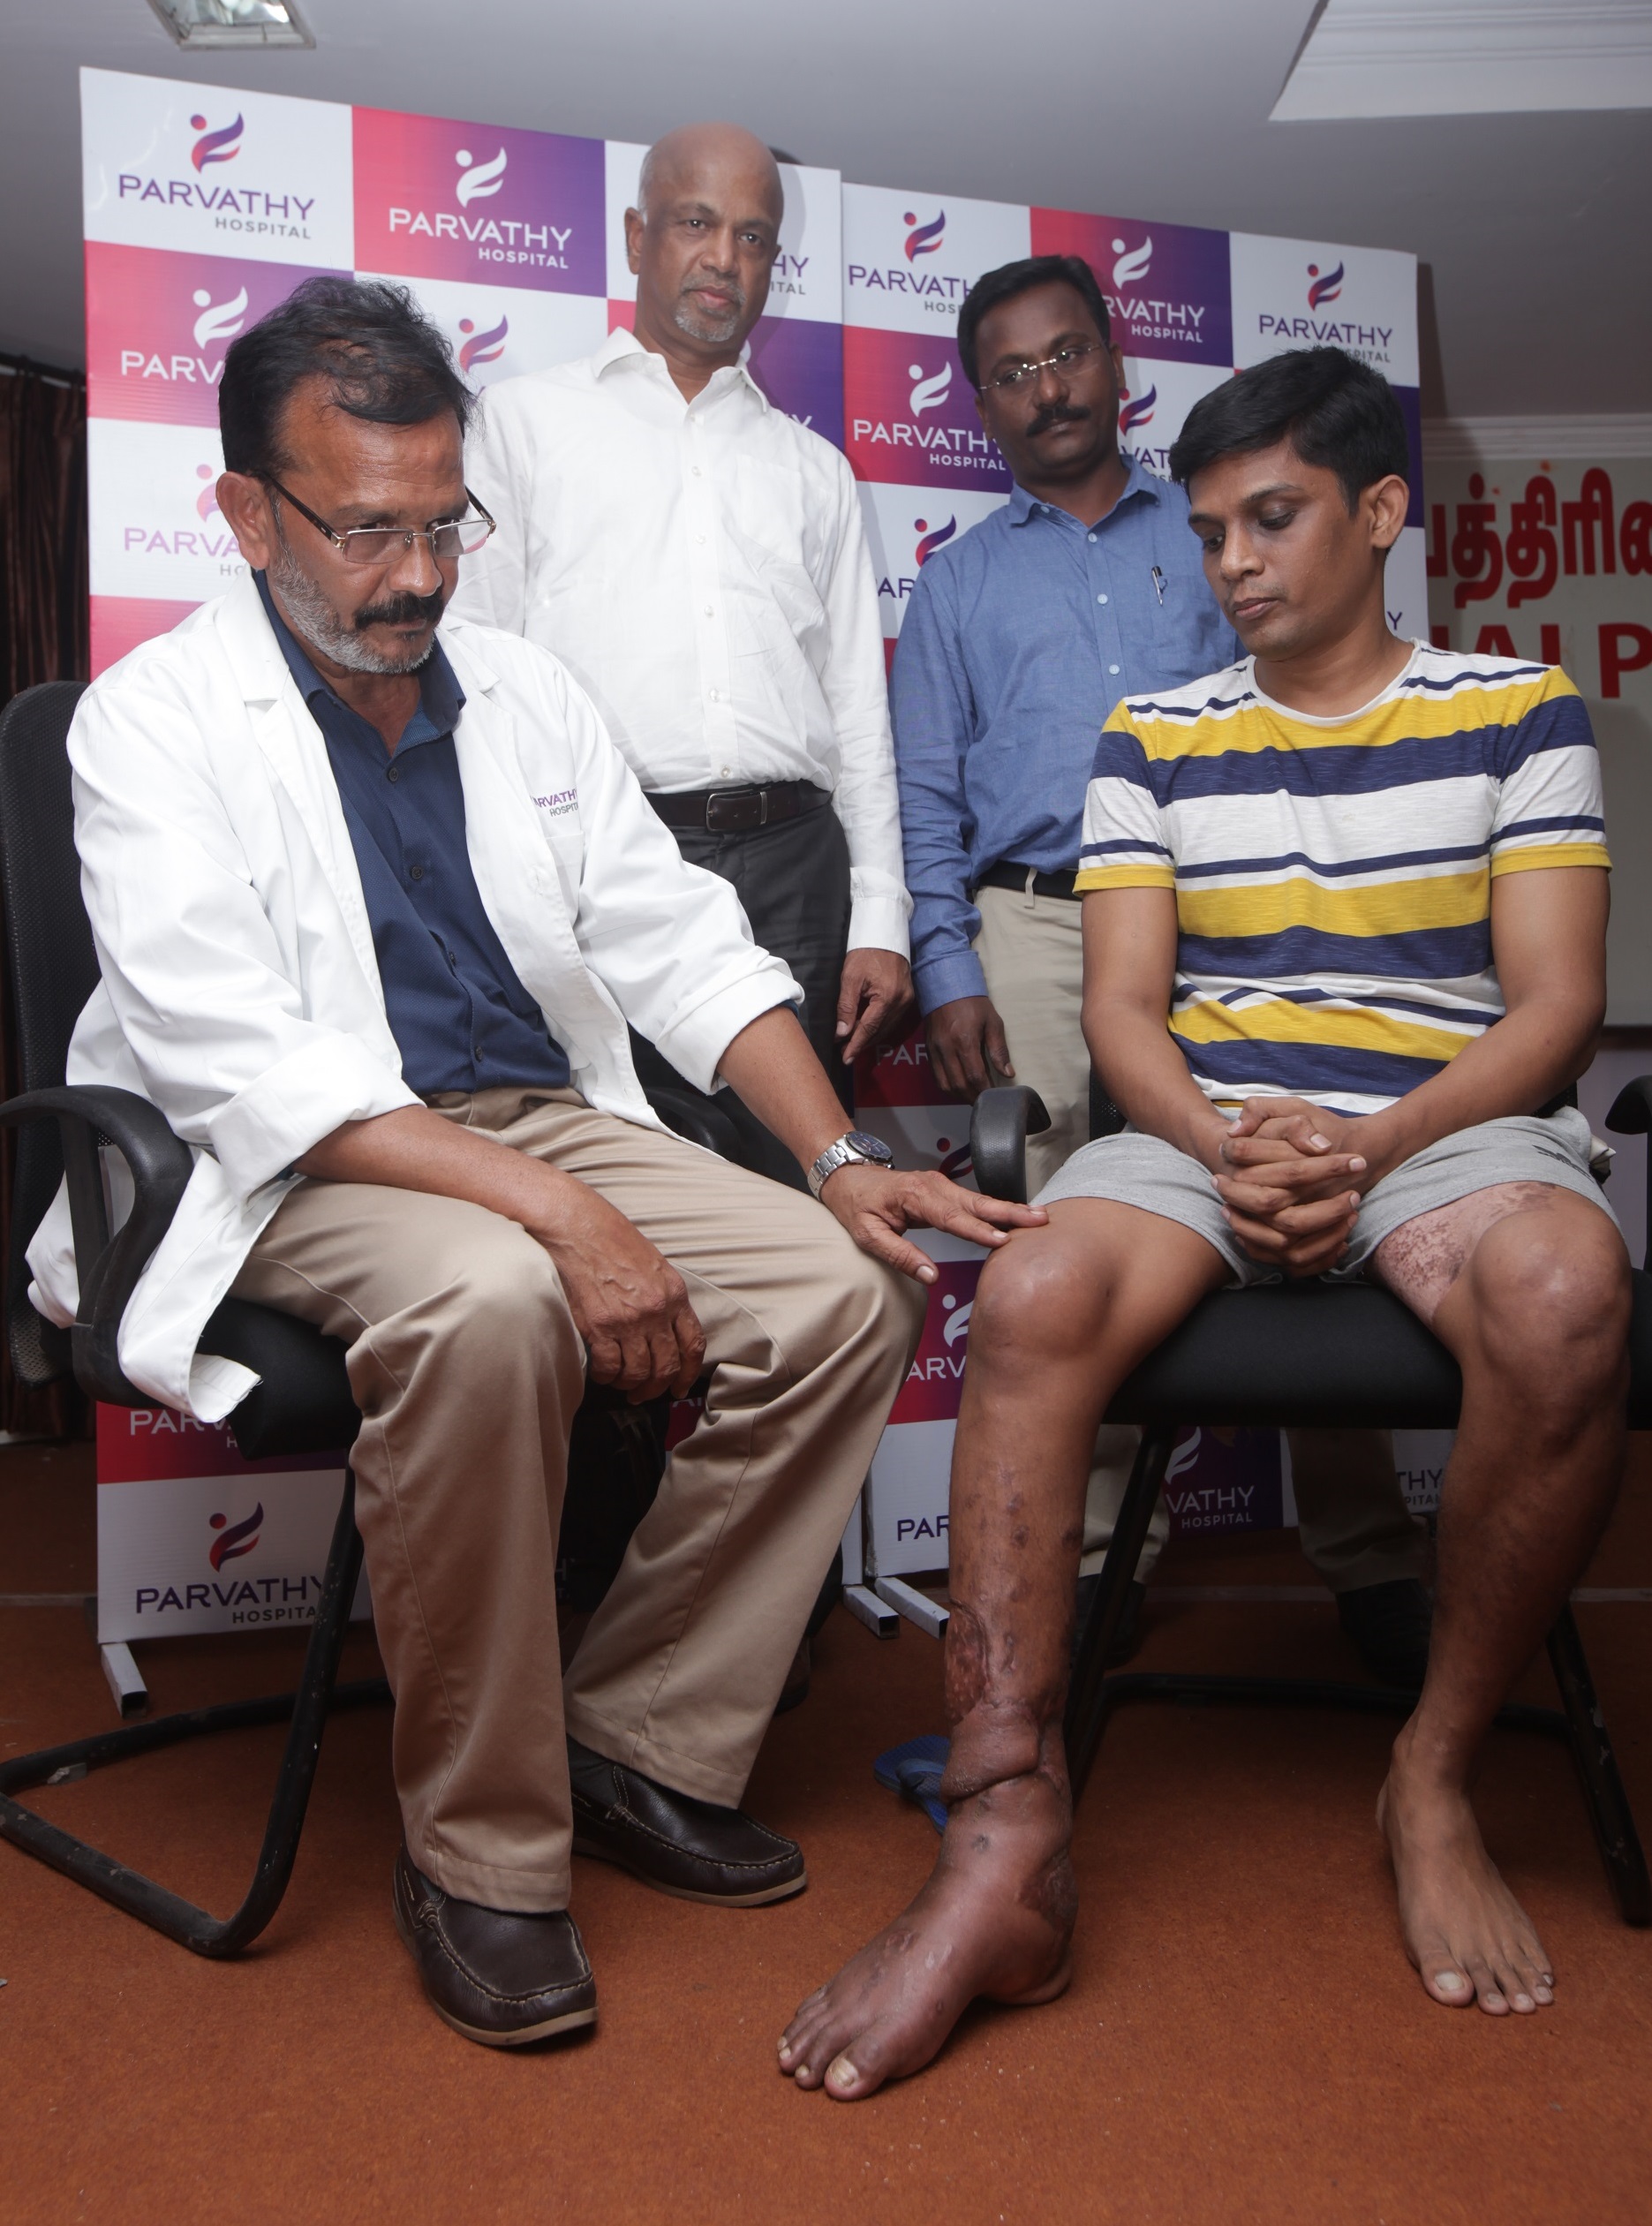 PARVATHY HOSPITAL CONDUCTS COMPLICATED SINGLE INNOVATIVE SURGERY